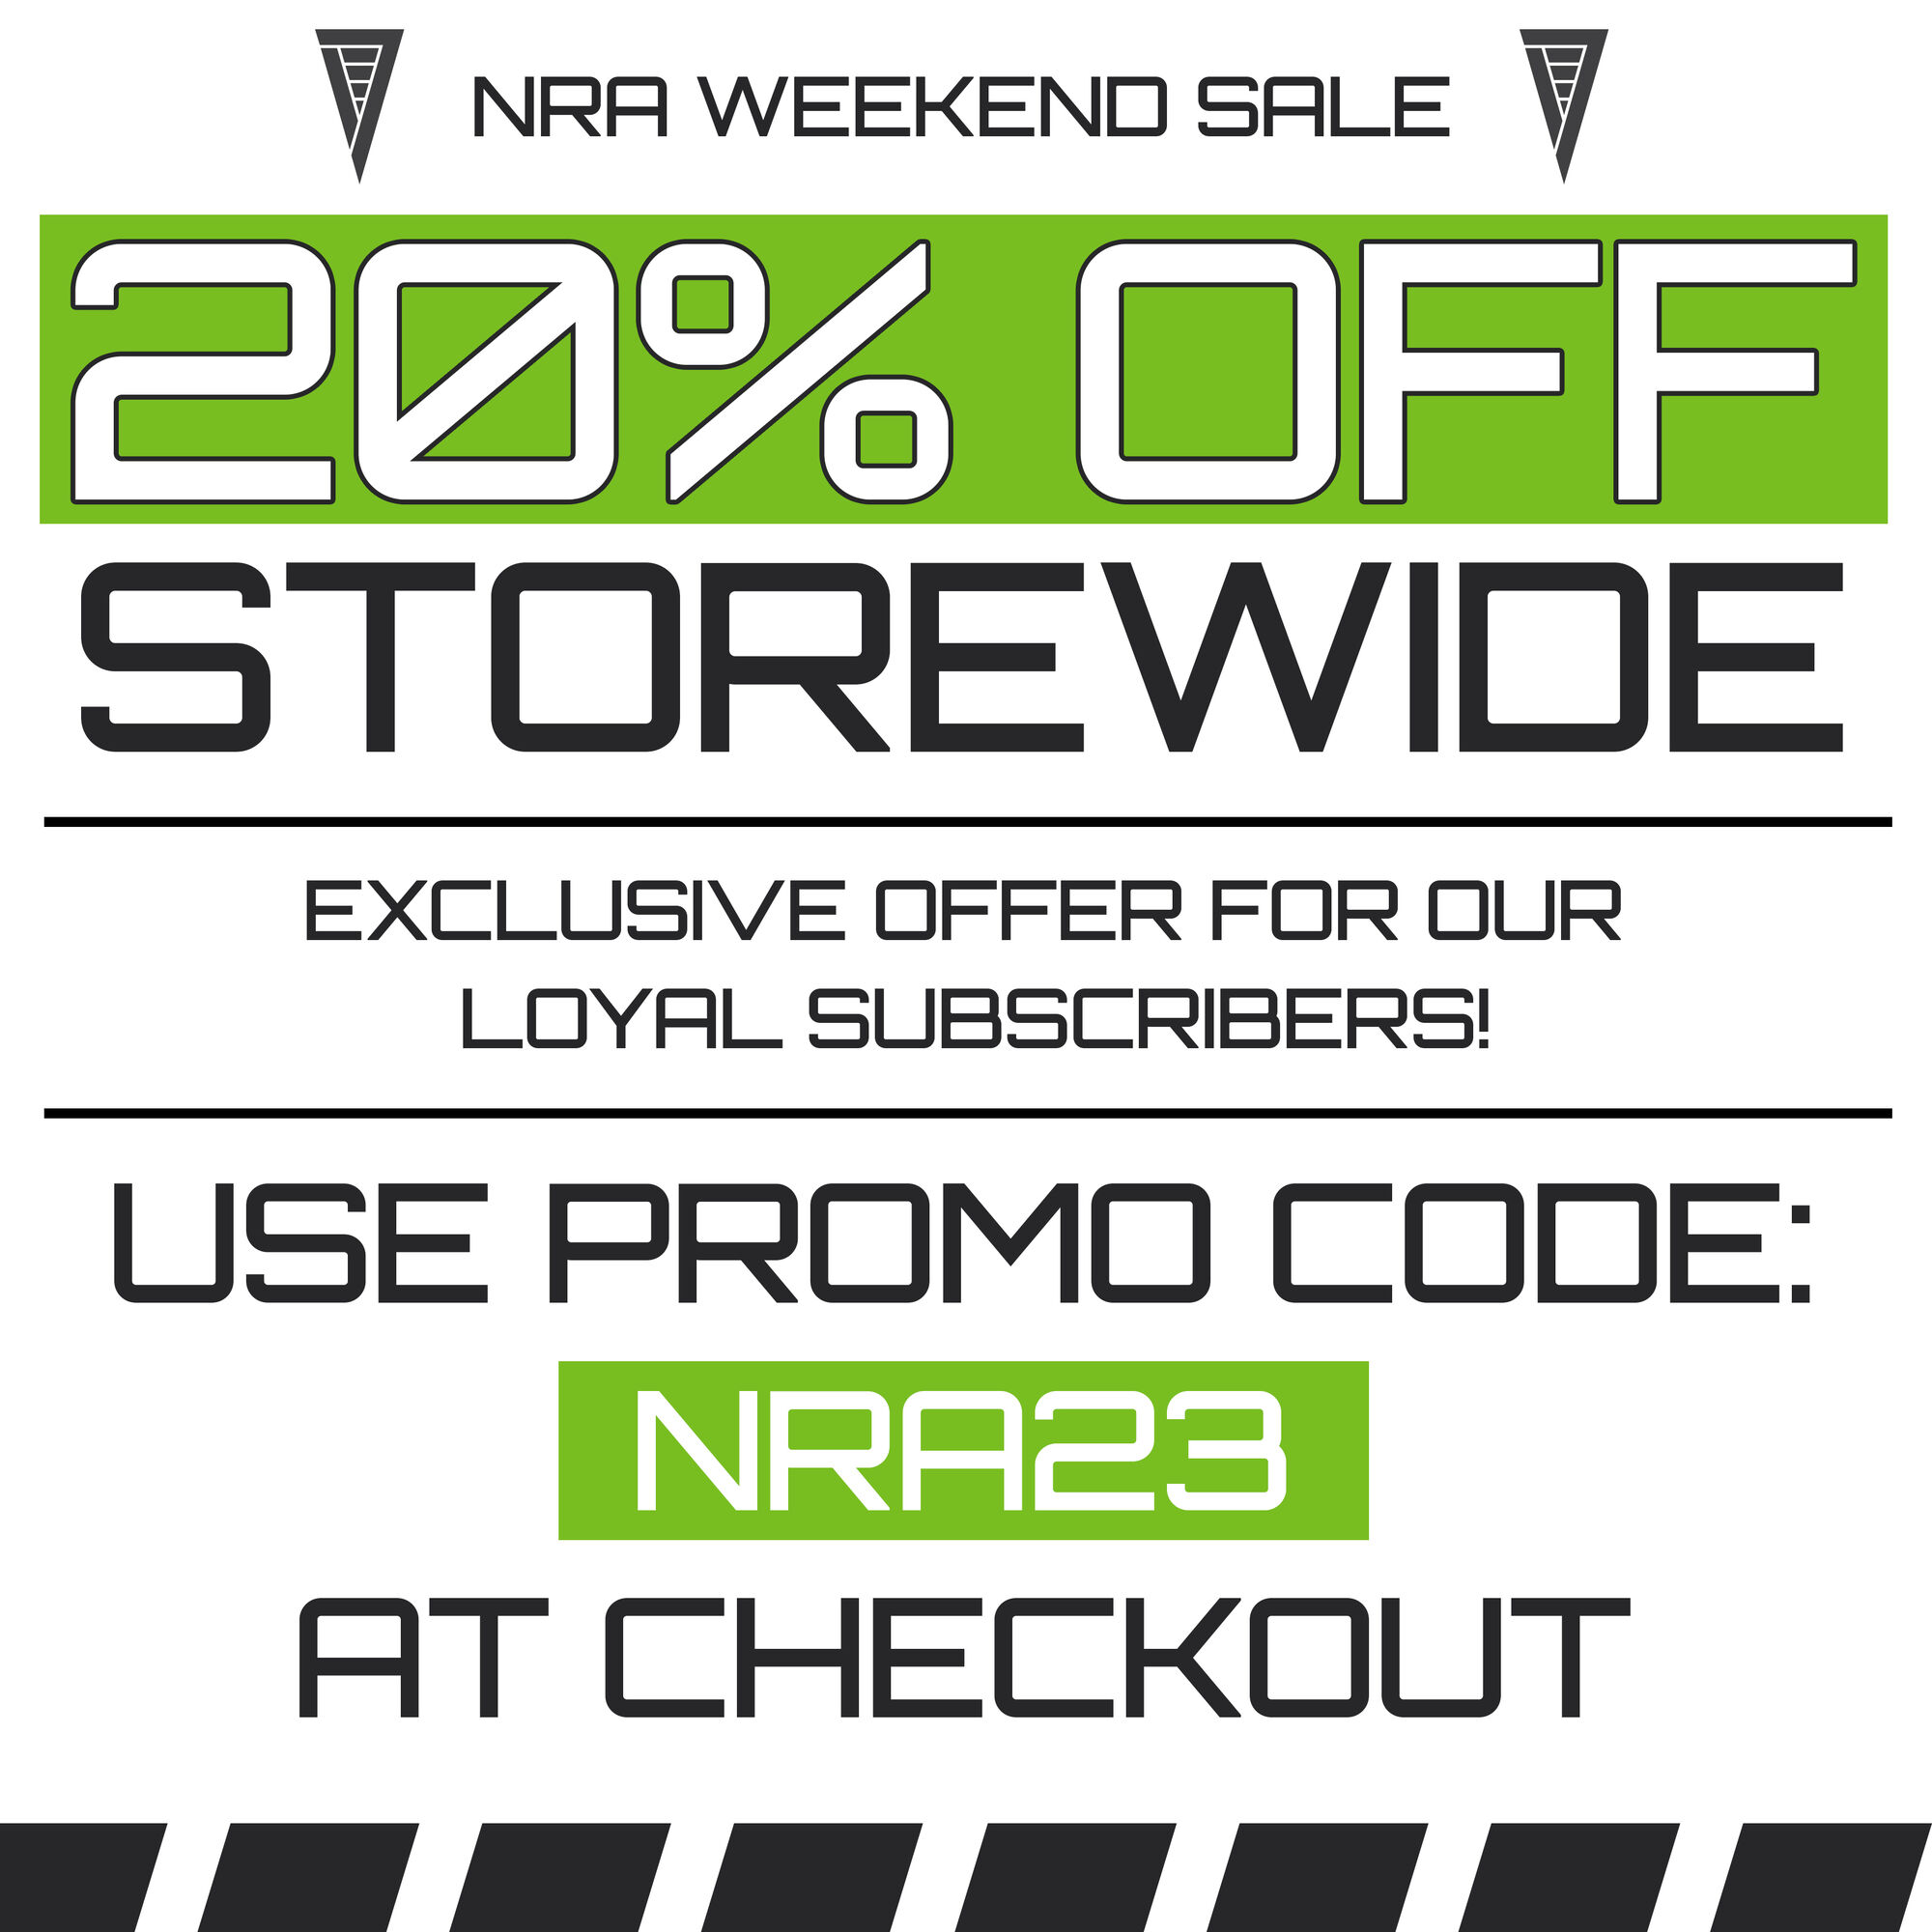 20% Off storewide. exclusive offer for loyal subscribers